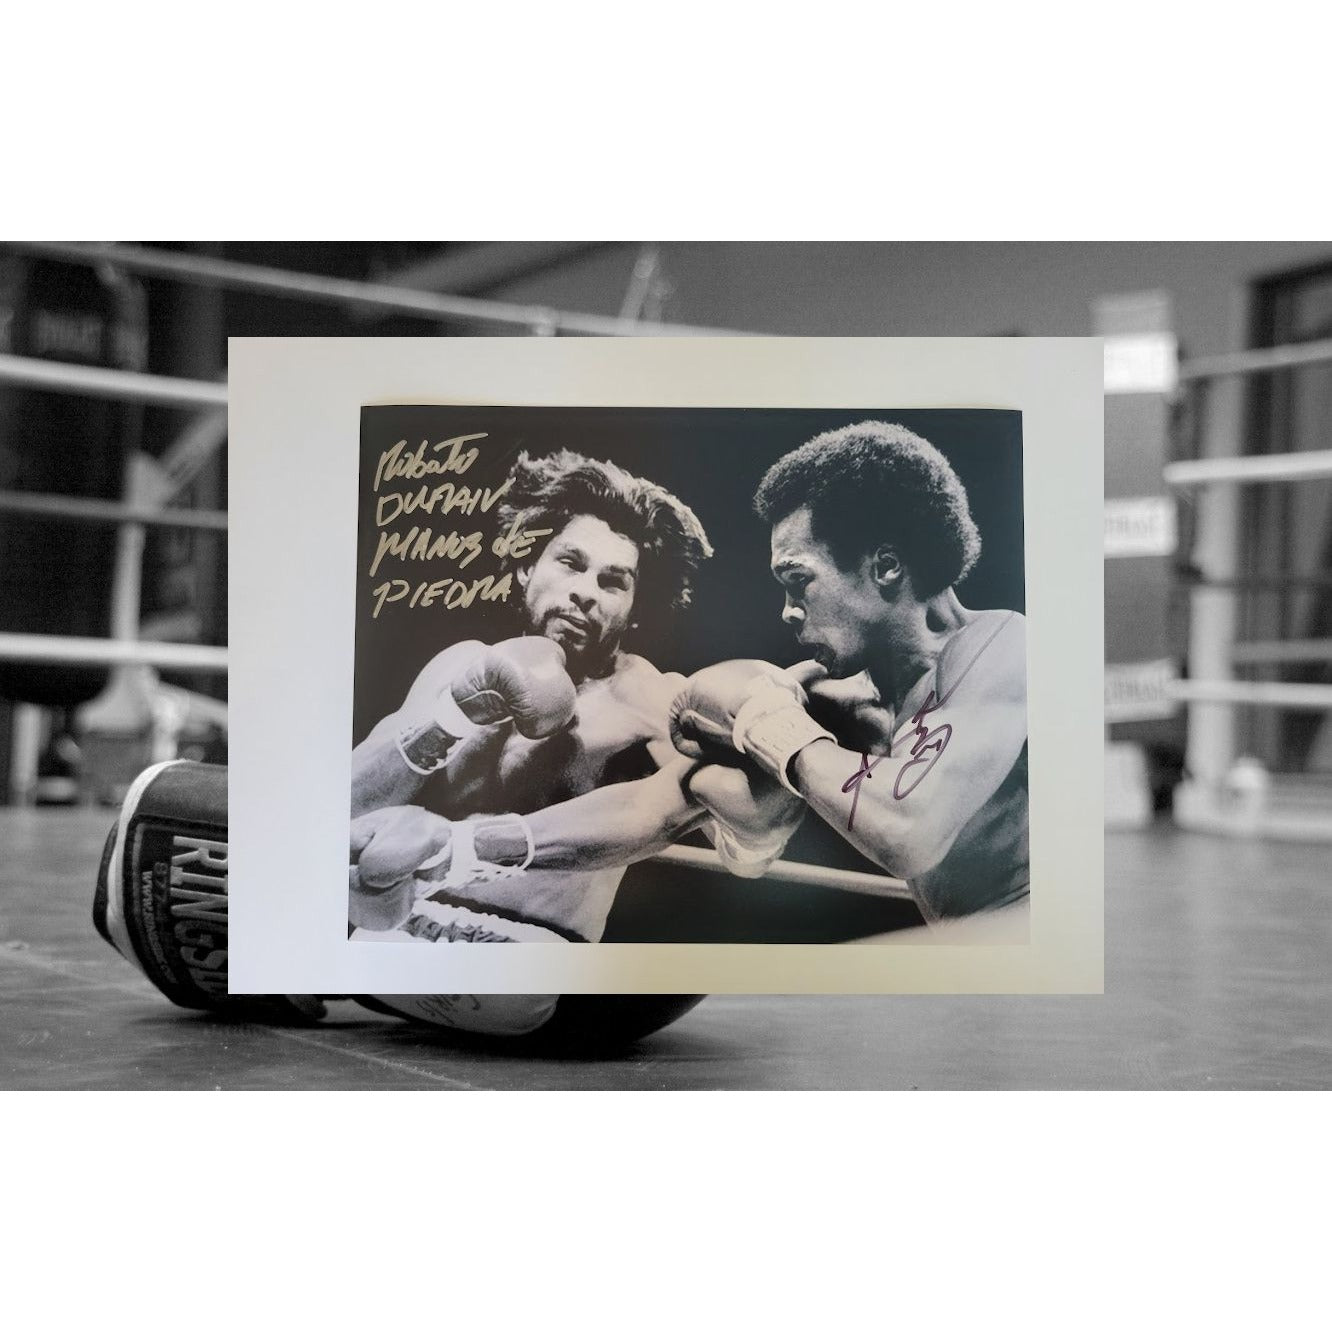 Roberto Duran and Sugar Ray Leonard 8 x 10 photo signed with proof